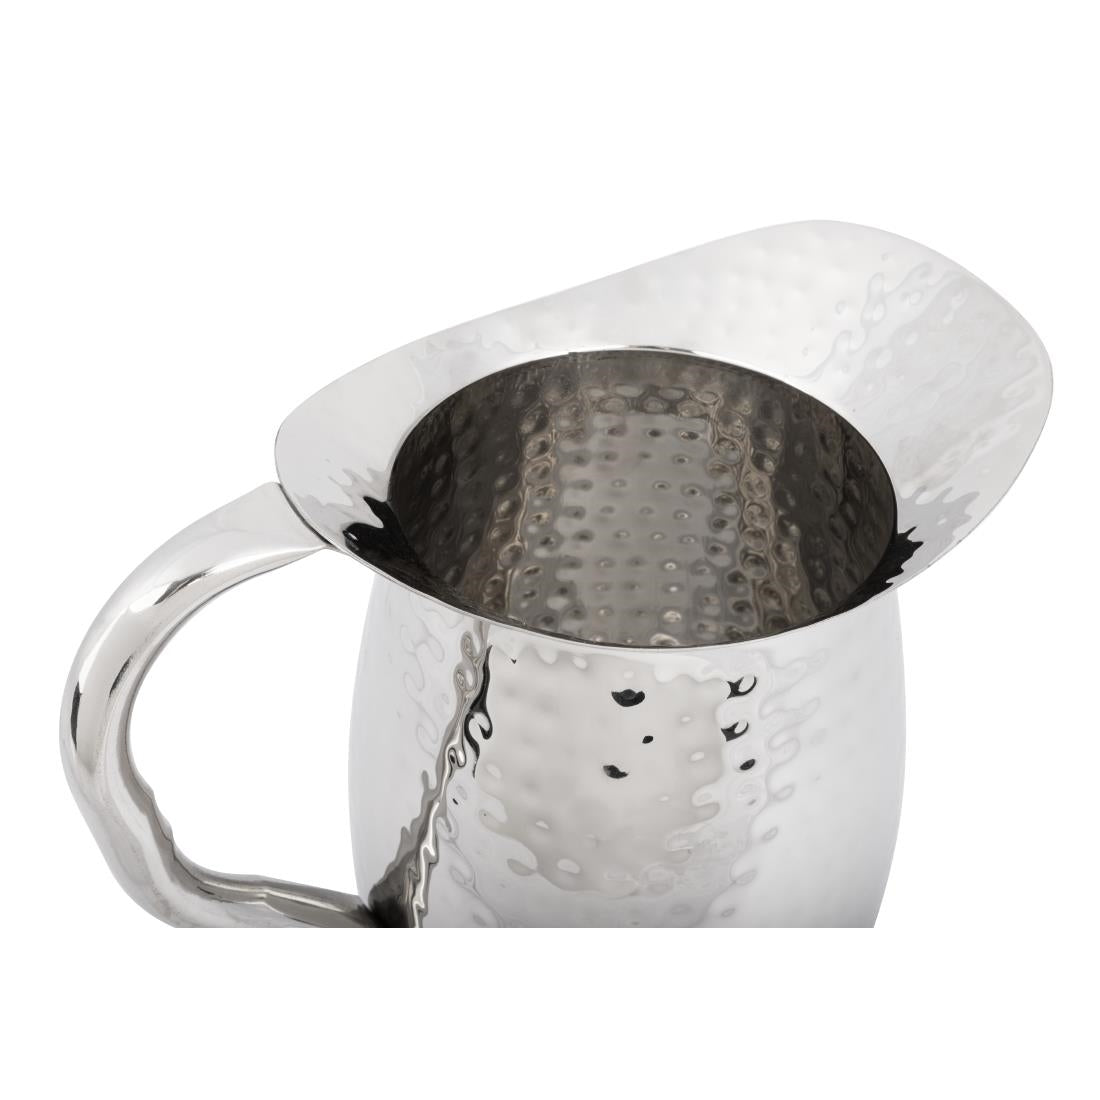 FU286 Olympia Hammered Pitcher 2Ltr